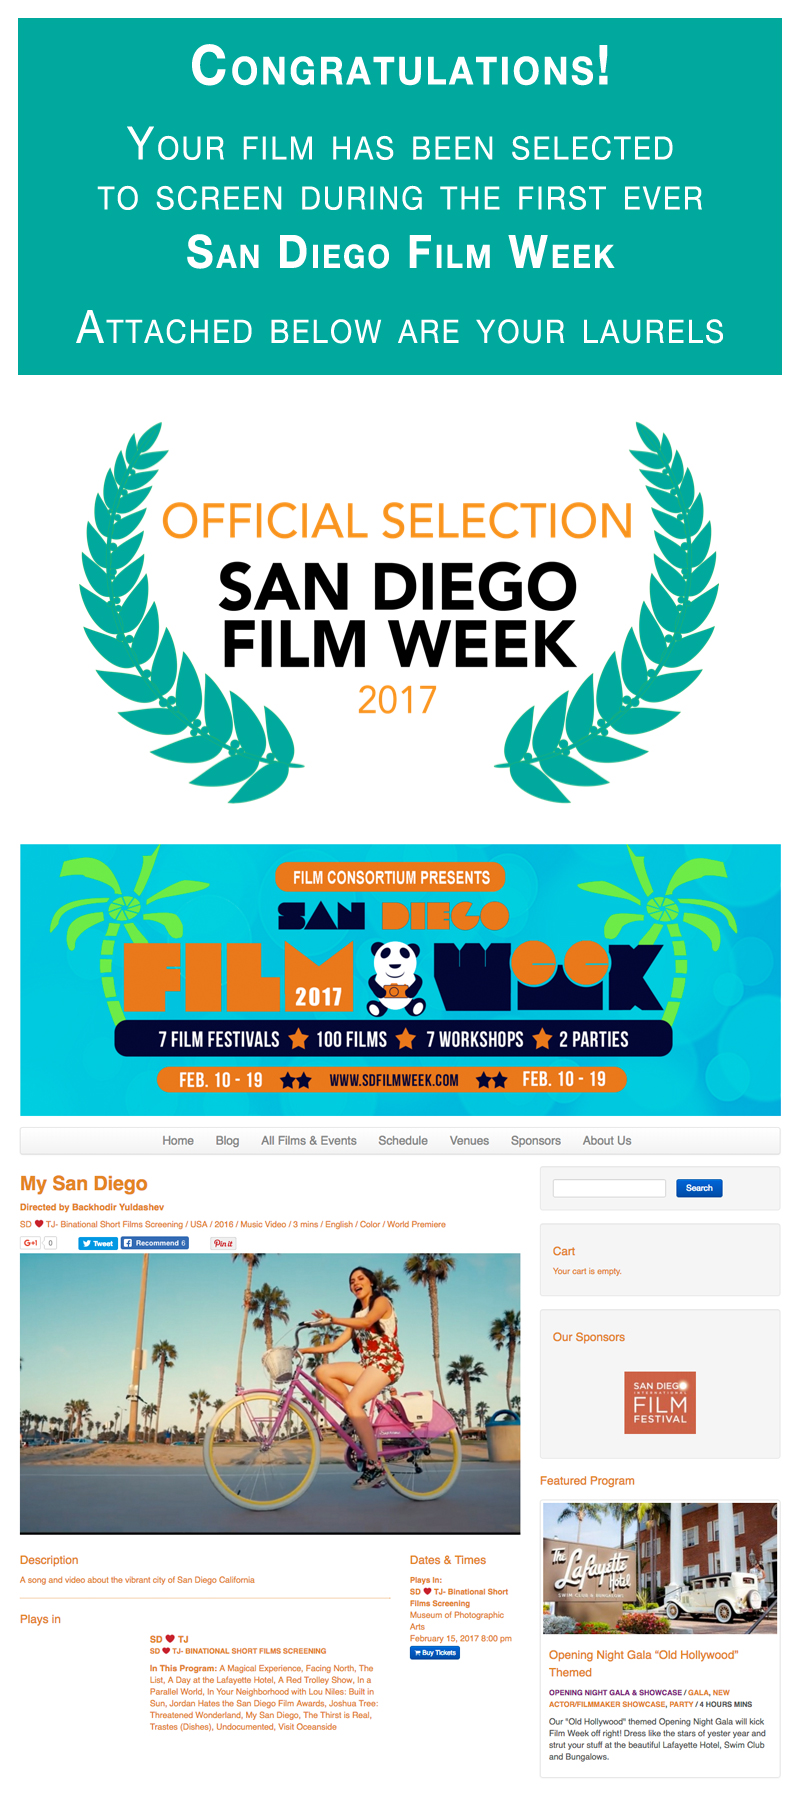 Tamara : My San Diego Music Video : Selected For The 2017 San Diego